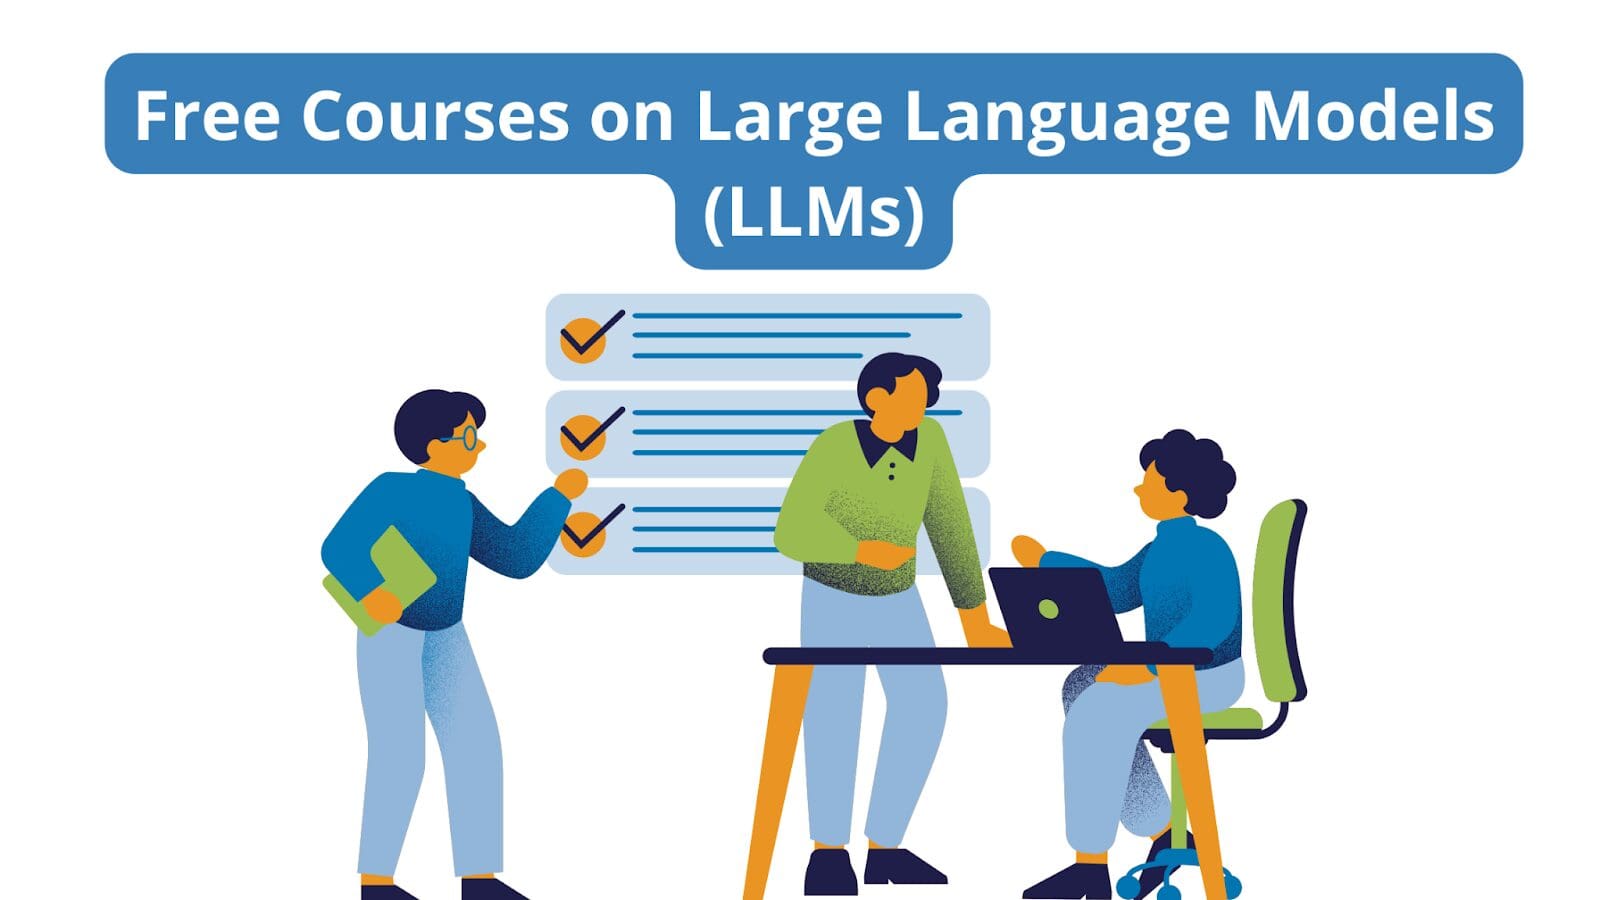 More Free Courses on Large Language Models